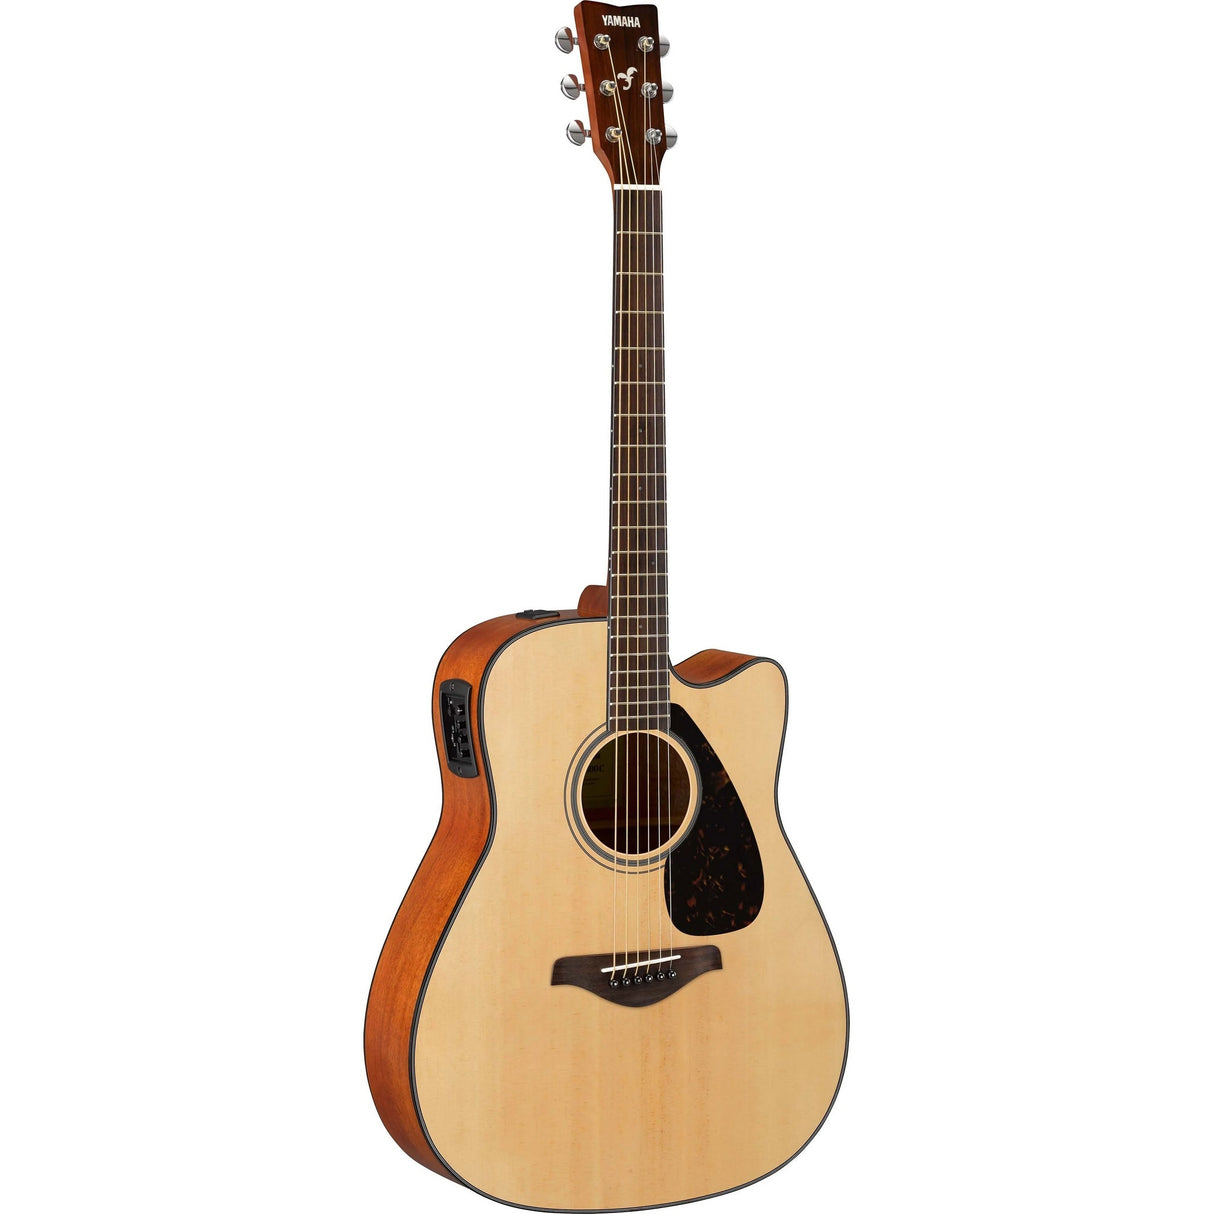 Yamaha FGX800C Traditional Western Body Solid Spruce Top Acoustic/Electric Guitar, Natural